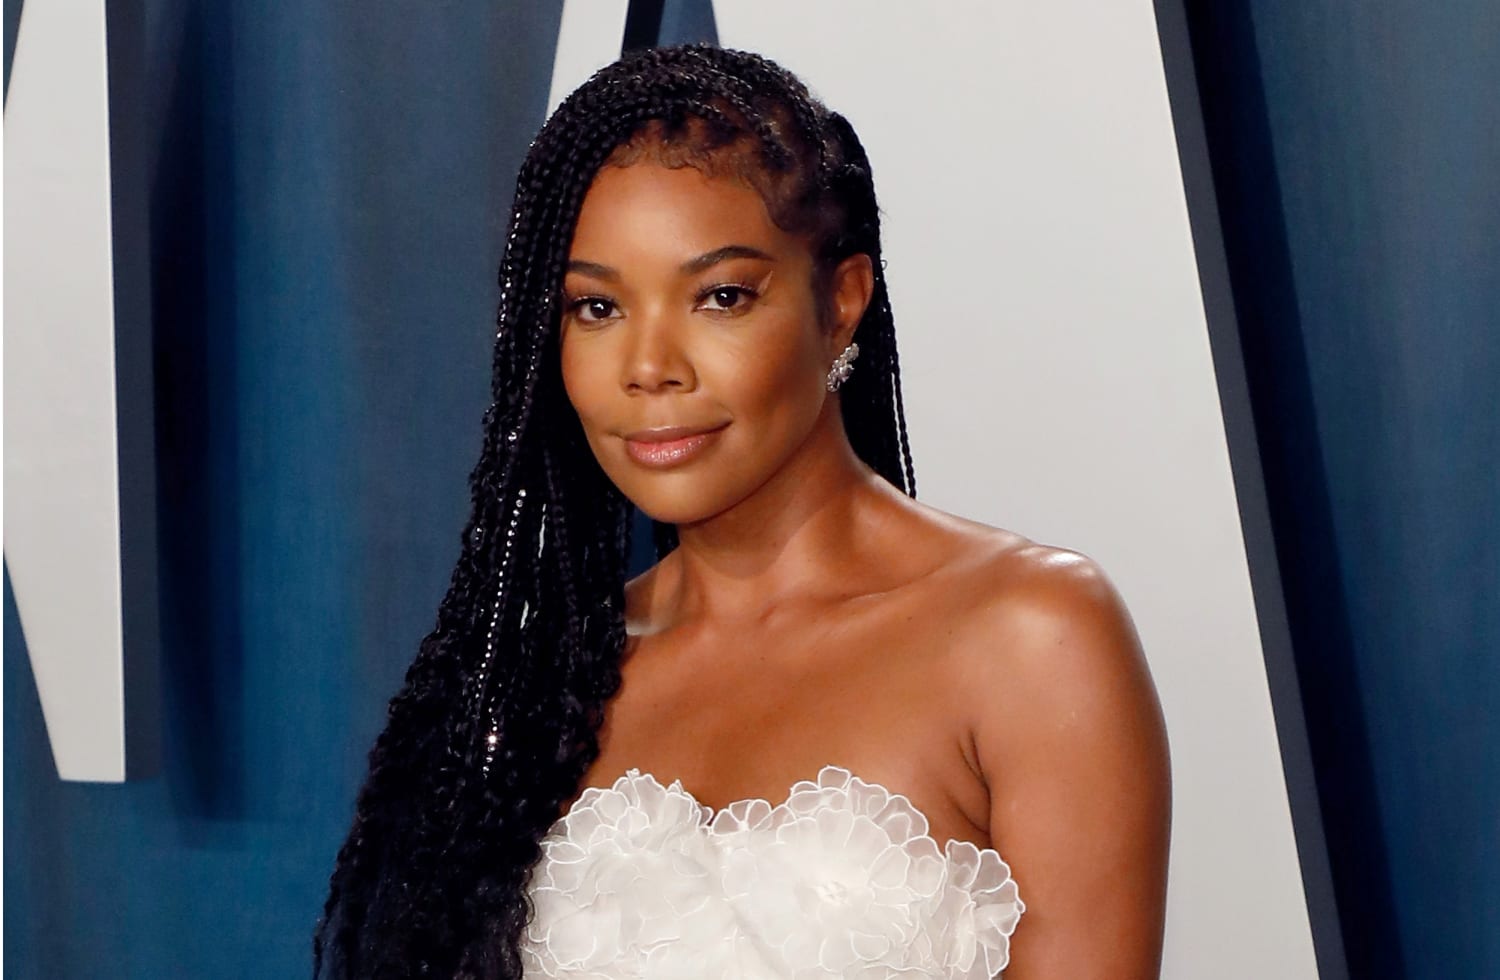 Gabrielle Union says she felt 'singled out as being difficult' on  'America's Got Talent'